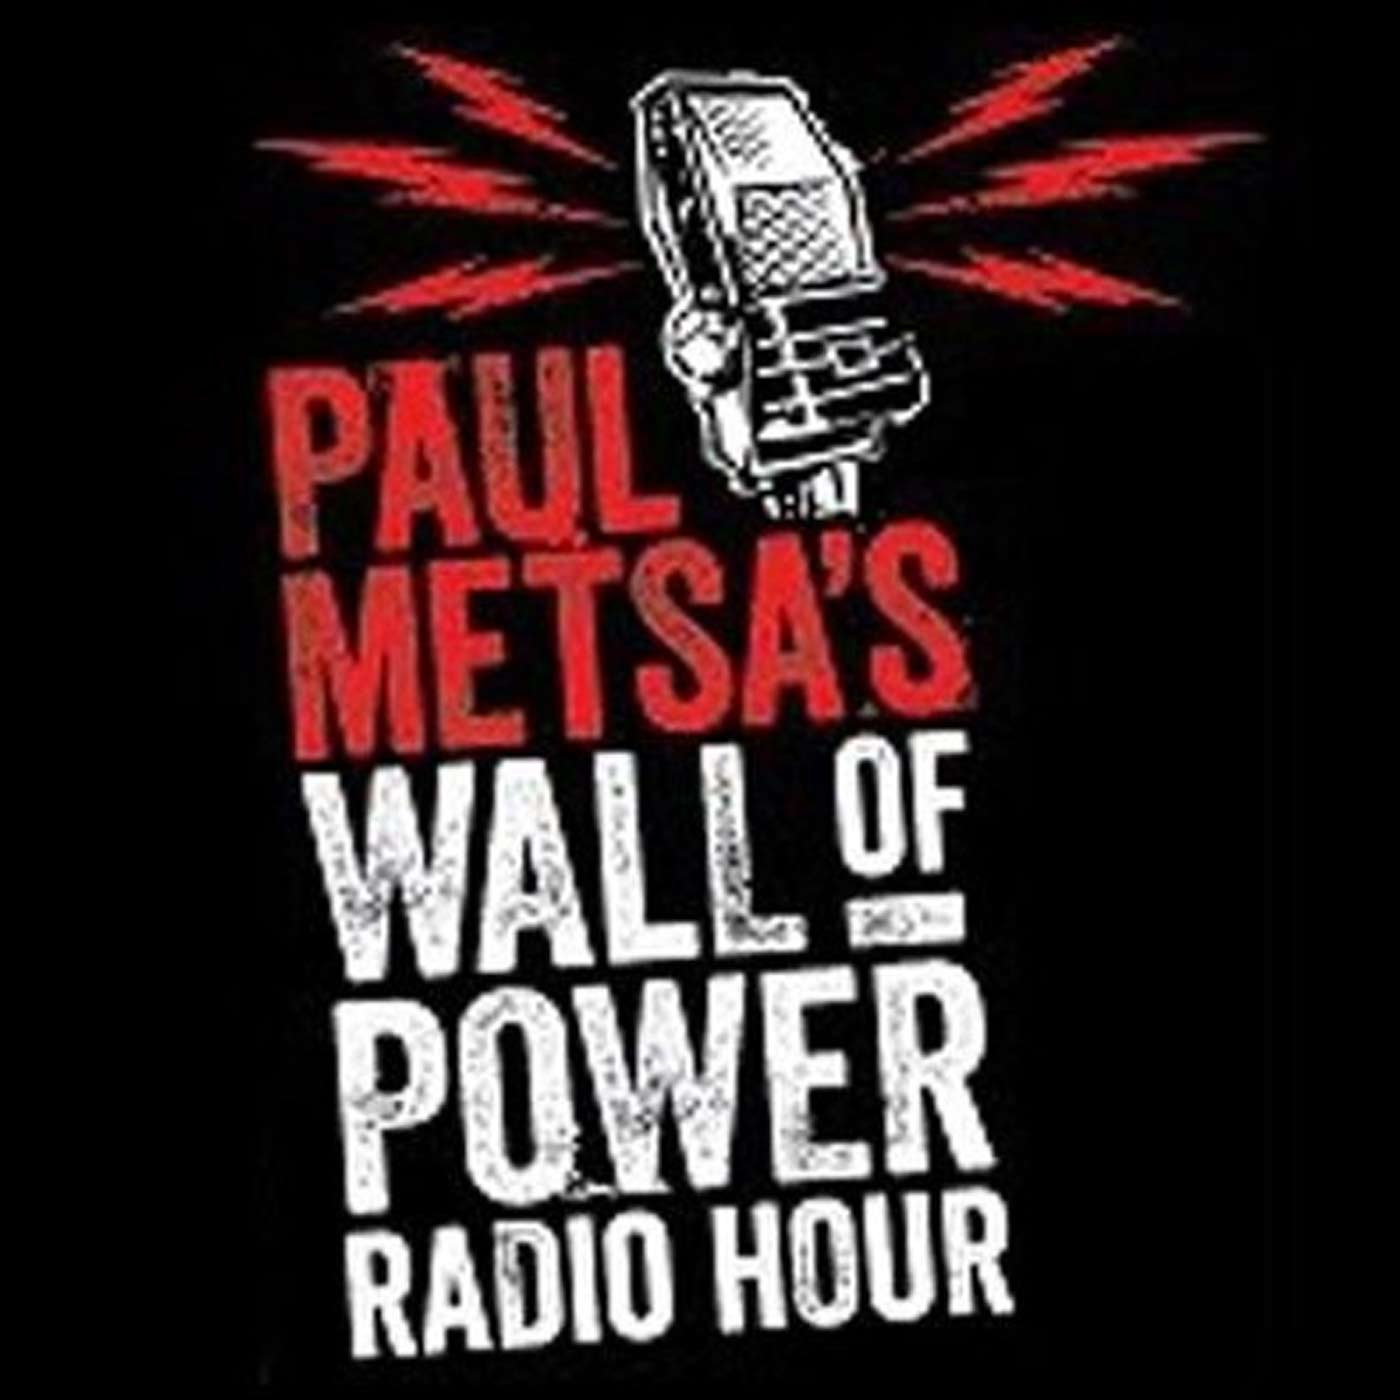 The Wall of Power Radio Hour